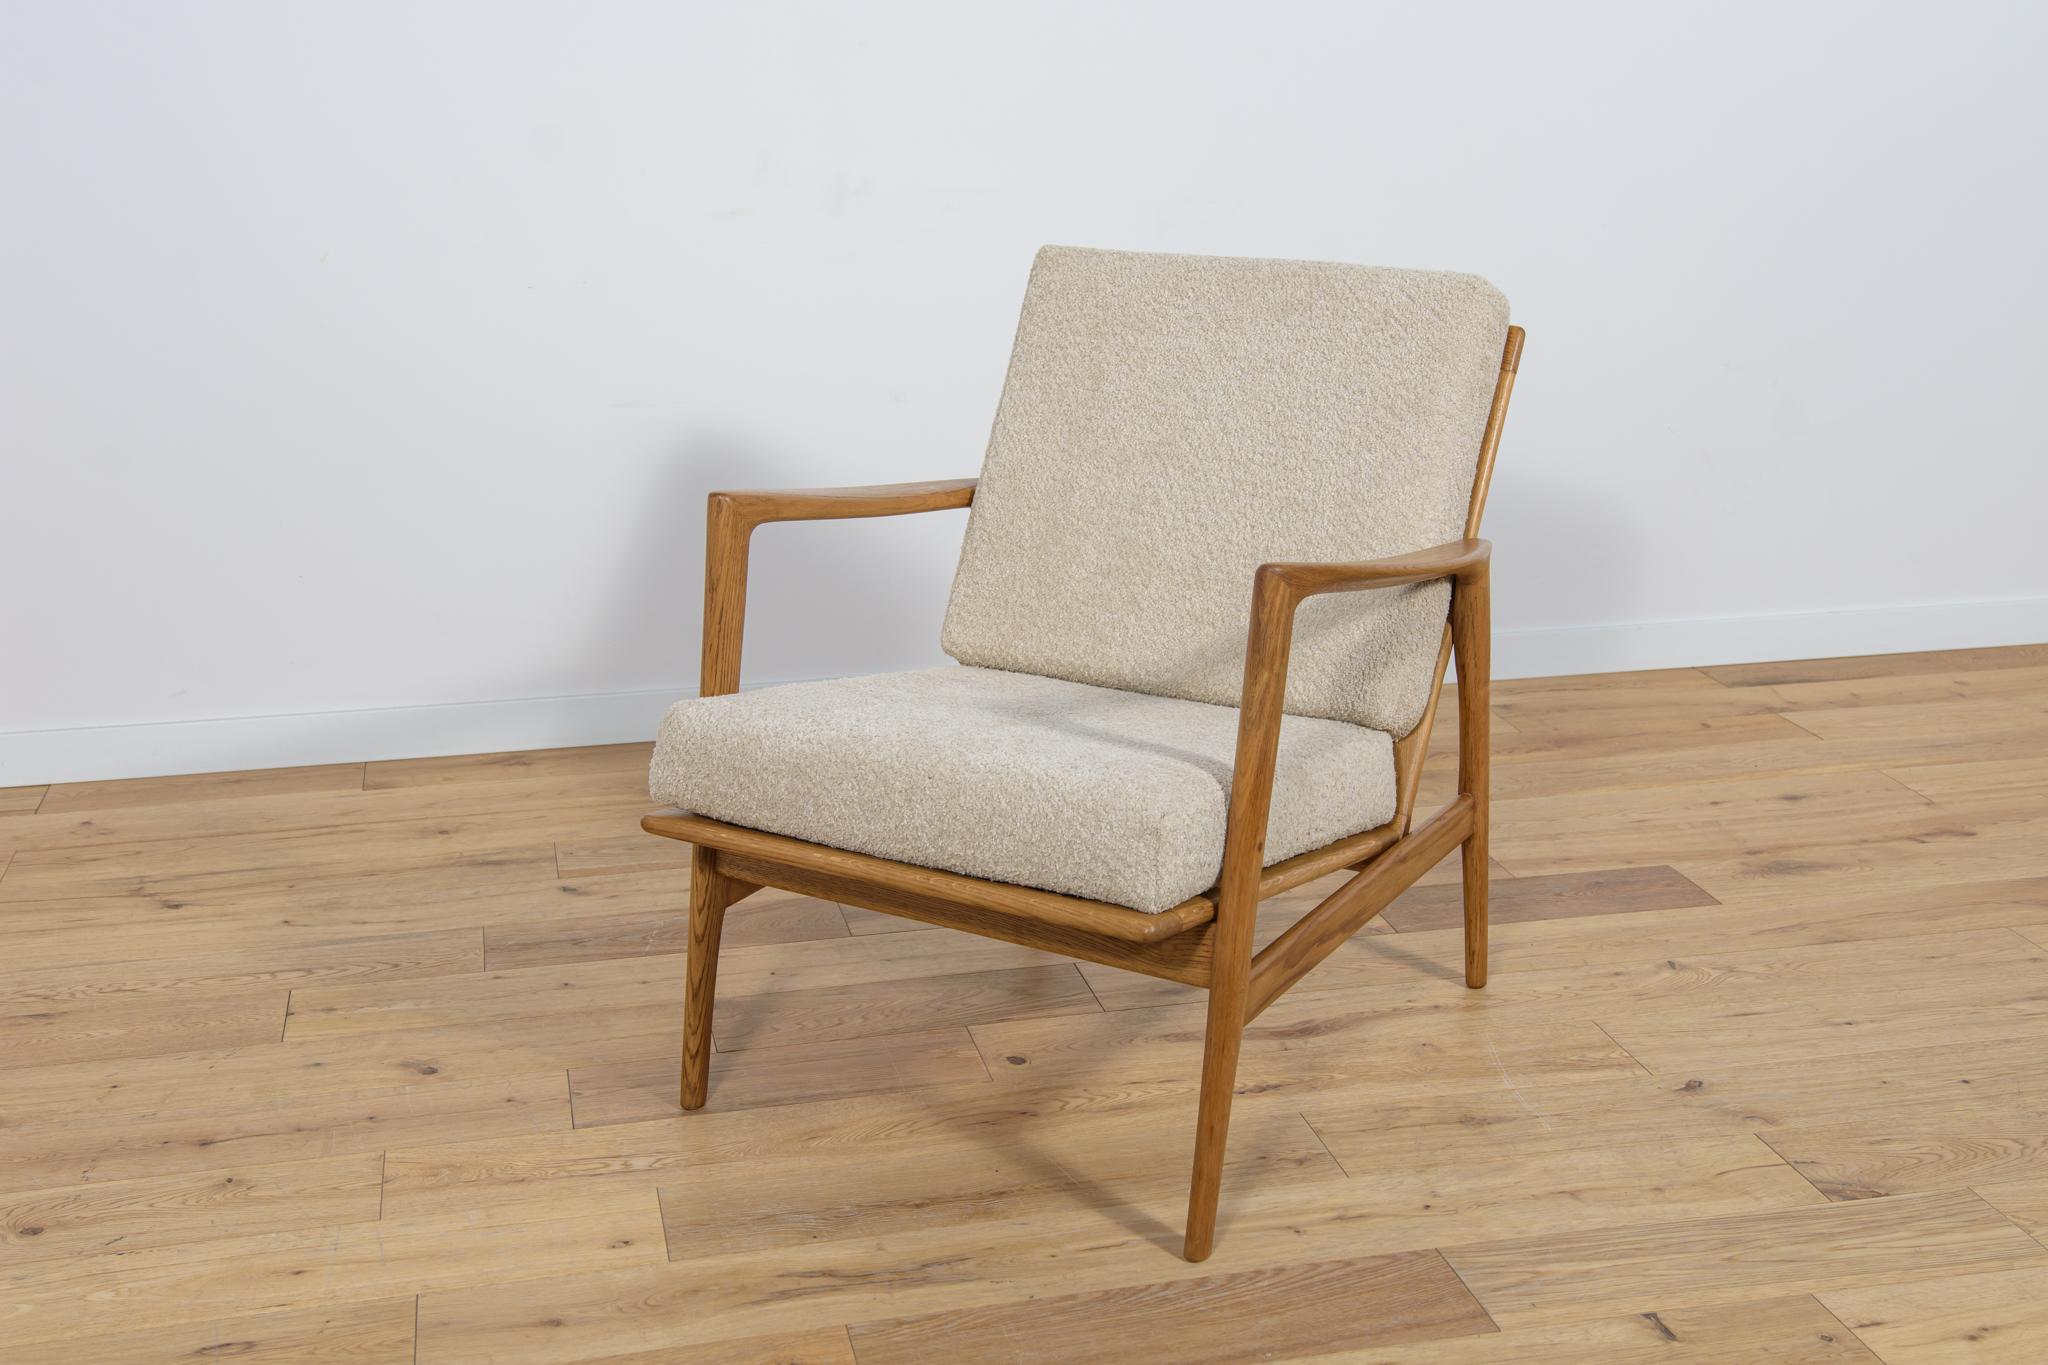 
The armchair model 300-139 that was produced by the Polish company Swarzędzka Furniture Factory. Comfortable armchair with a unique form. Armchair have been professionally restored. The wooden structure has been cleaned and polished with a oak wax.